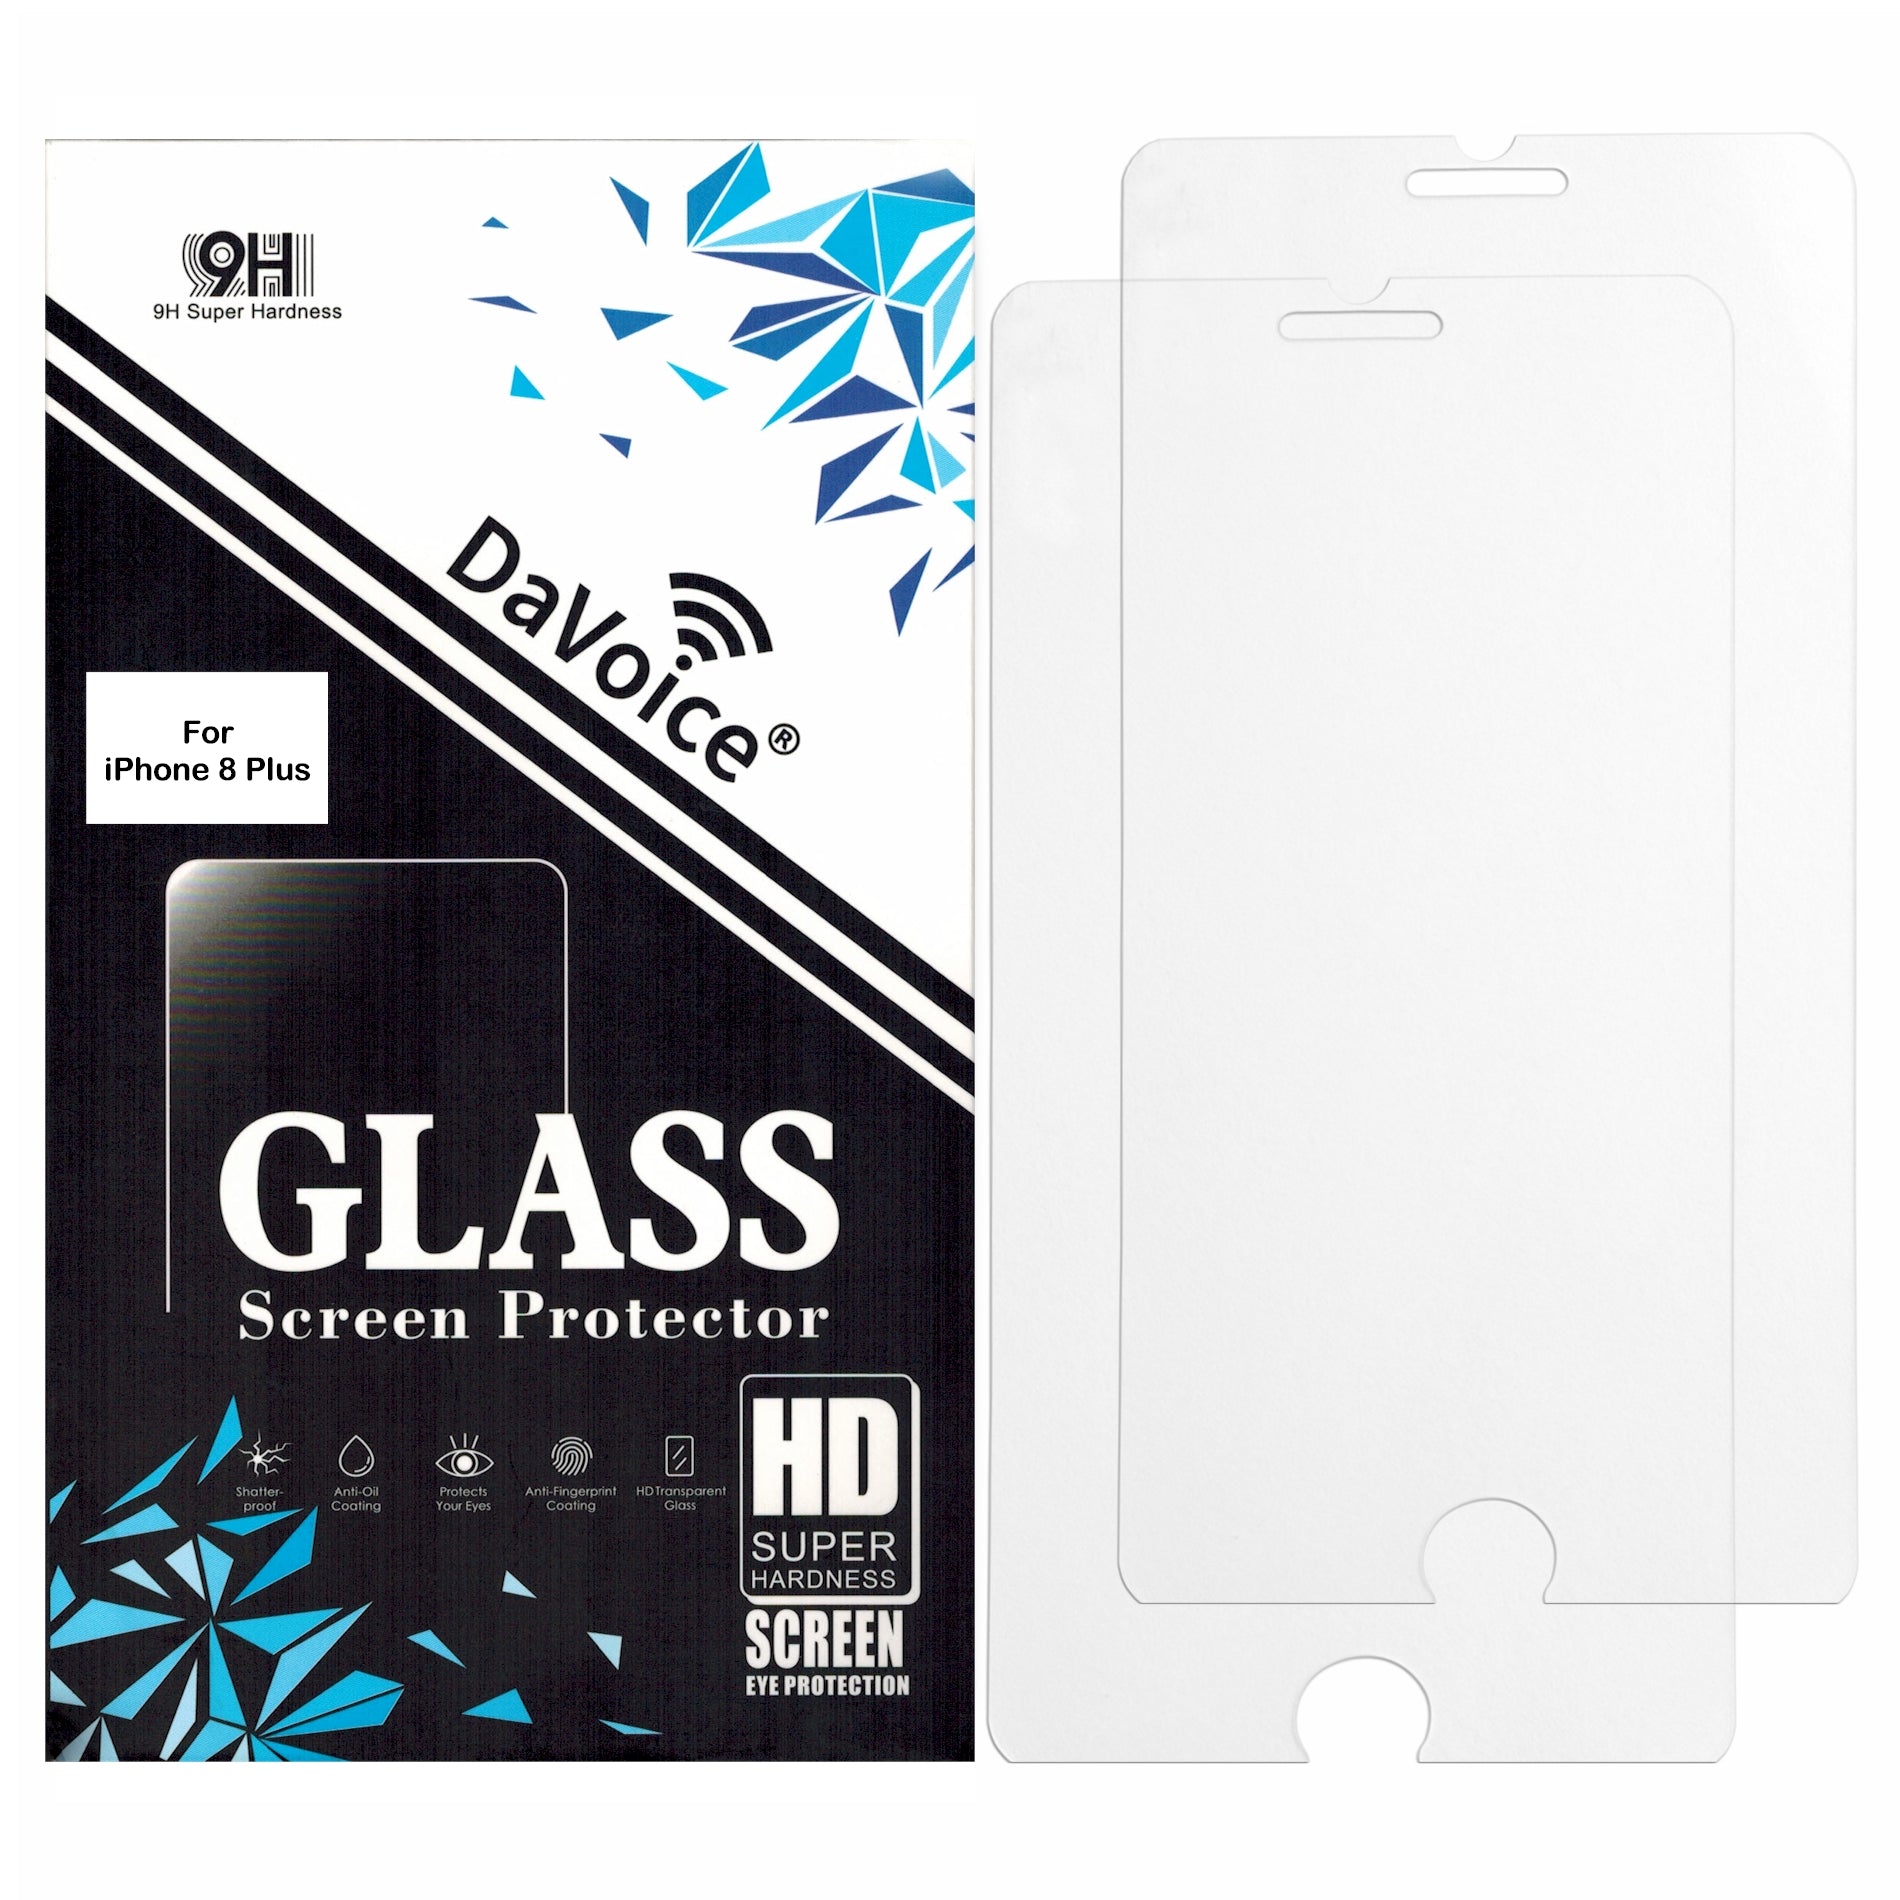 iPhone 8 Plus Screen Protector Tempered Glass Screen Protector – DaVoice